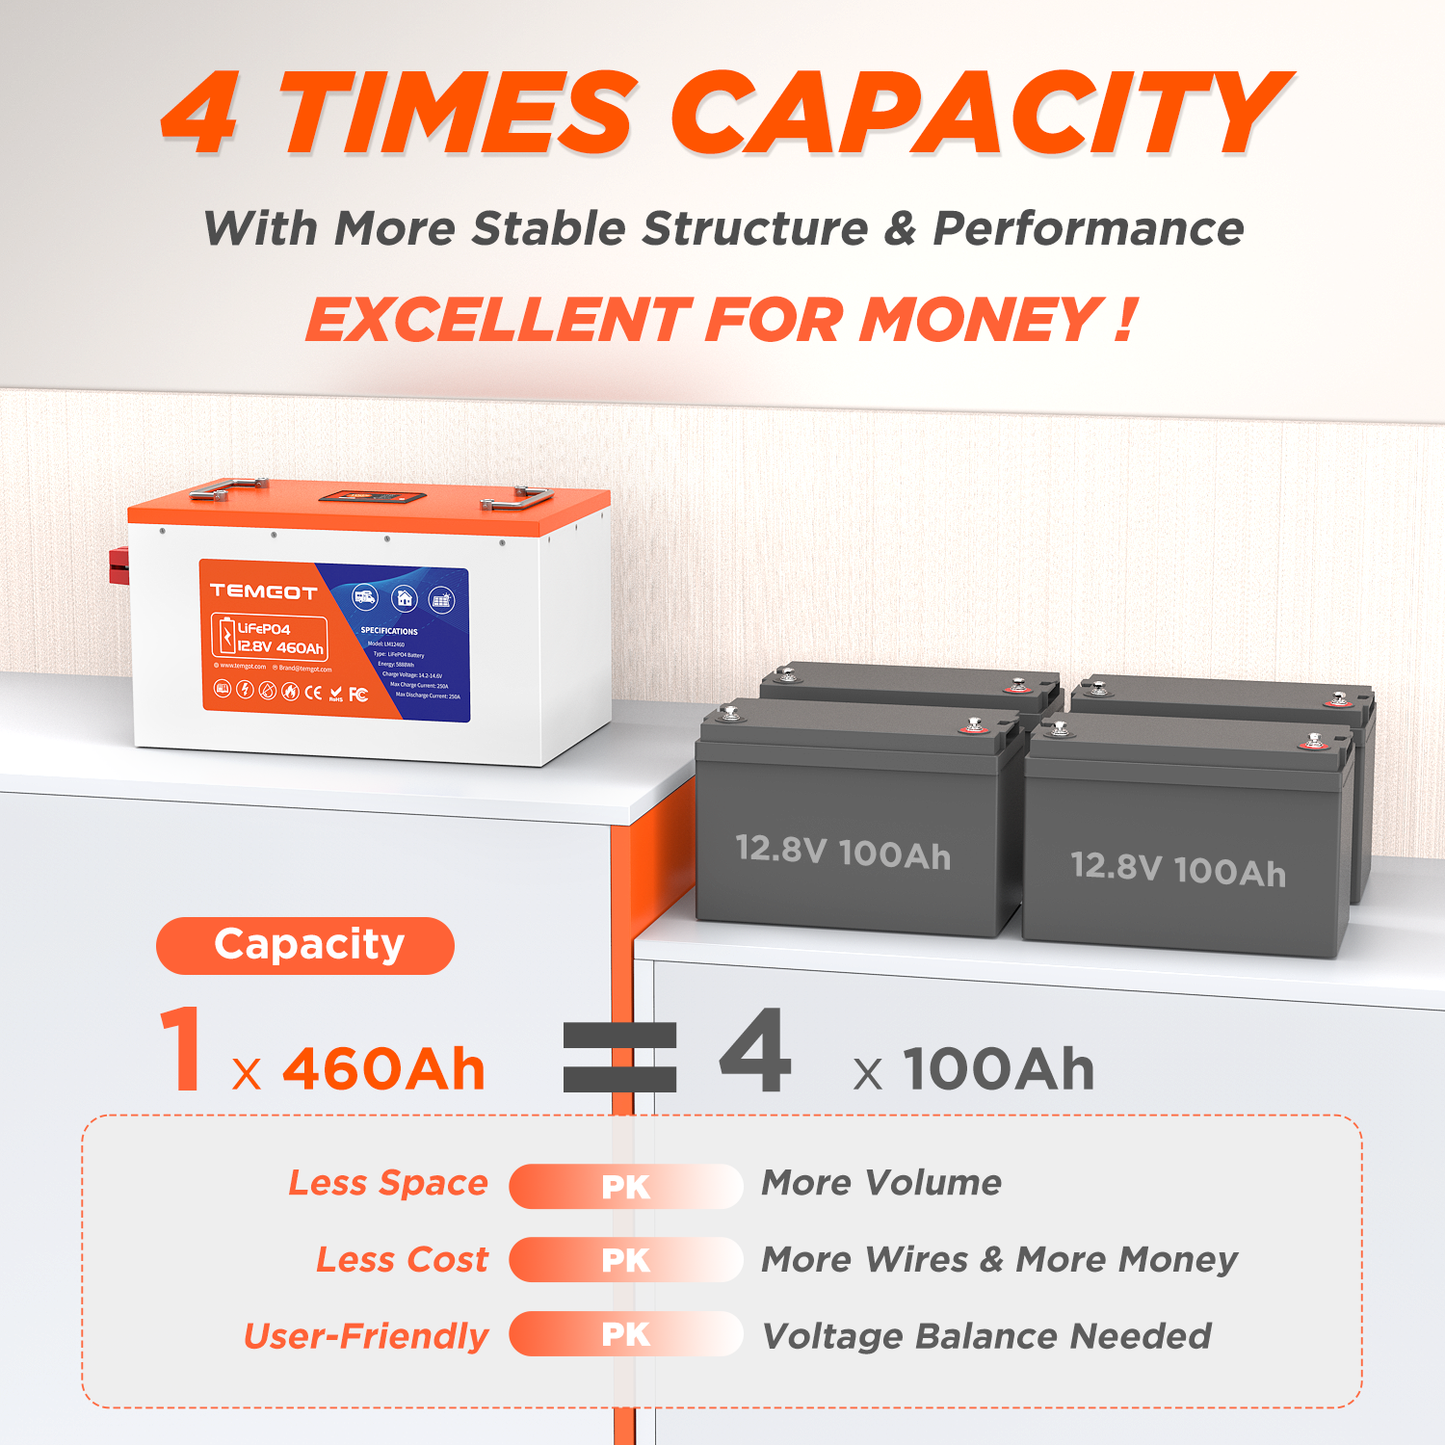 12V 460Ah LiFePO4 RV Battery, Built-in 250A BMS, Max. 3200W Load Power, 5888Wh Usable Energy, 5000+ Cycles Low Temp Cutoff Lithium Battery, Perfect for RVs, Motorhomes, and Off Grid